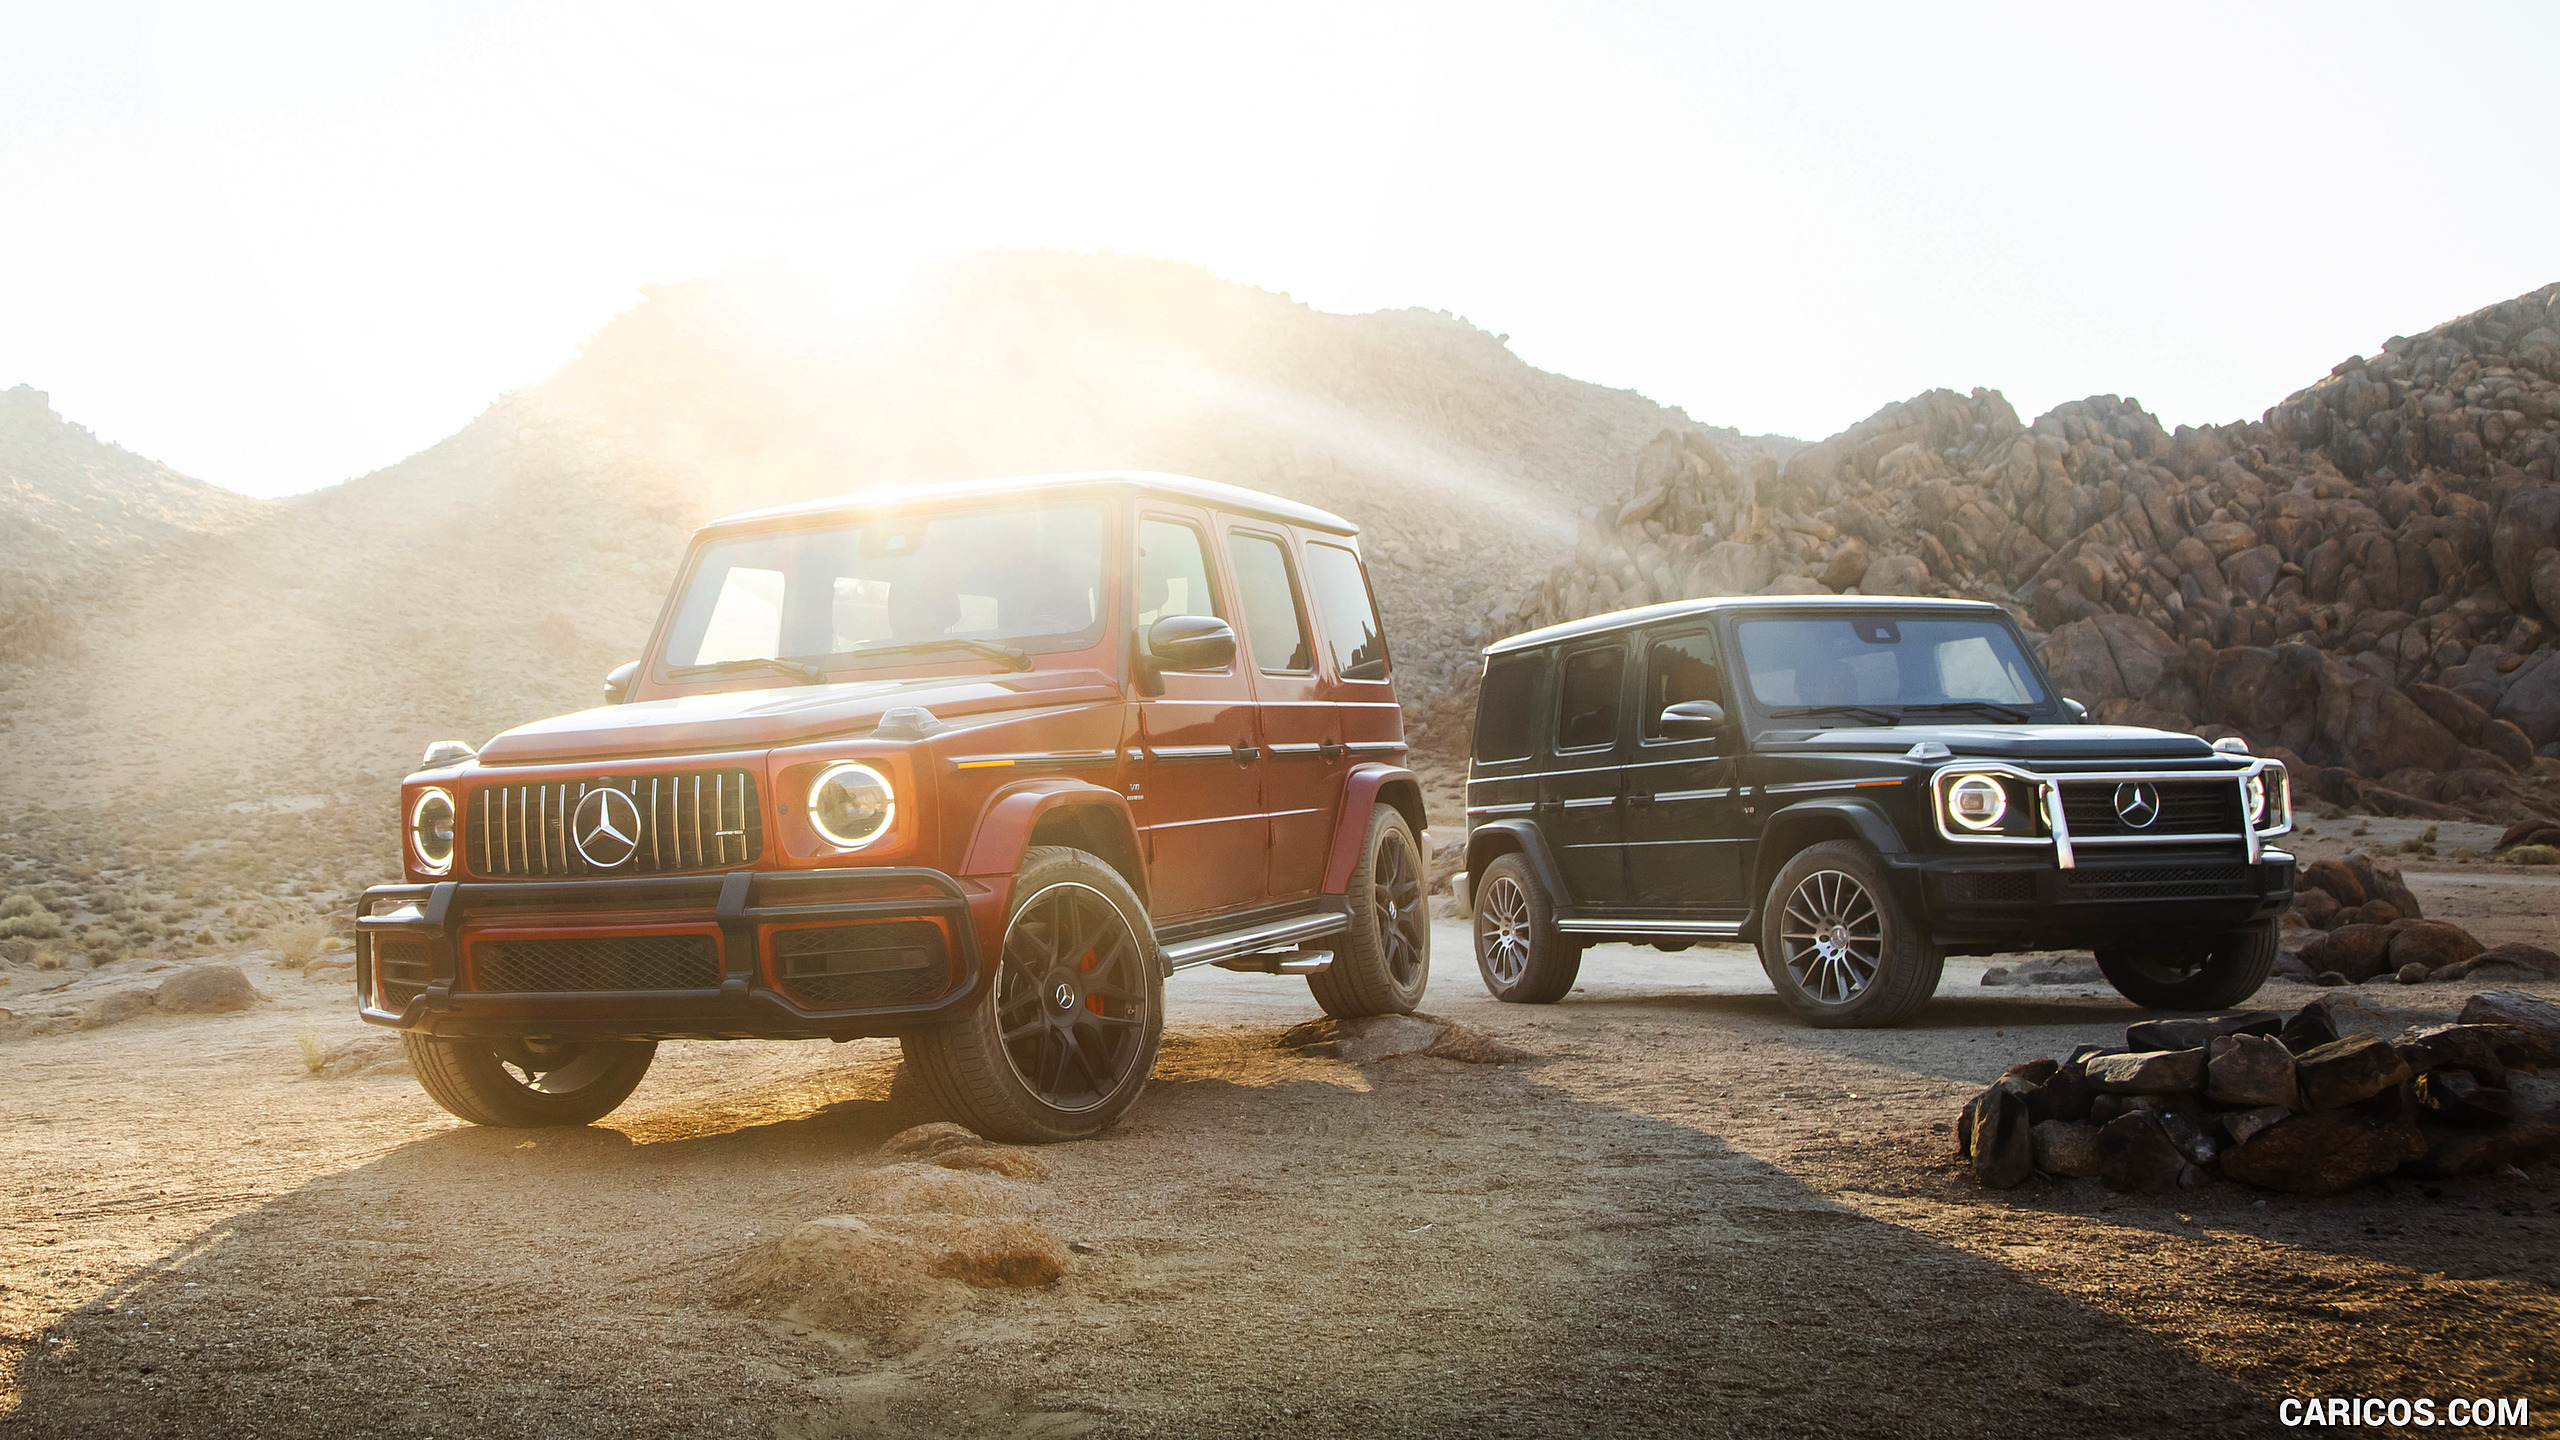 2019 Mercedes-AMG G63 (U.S.-Spec) and 2019 G550, #364 of 452